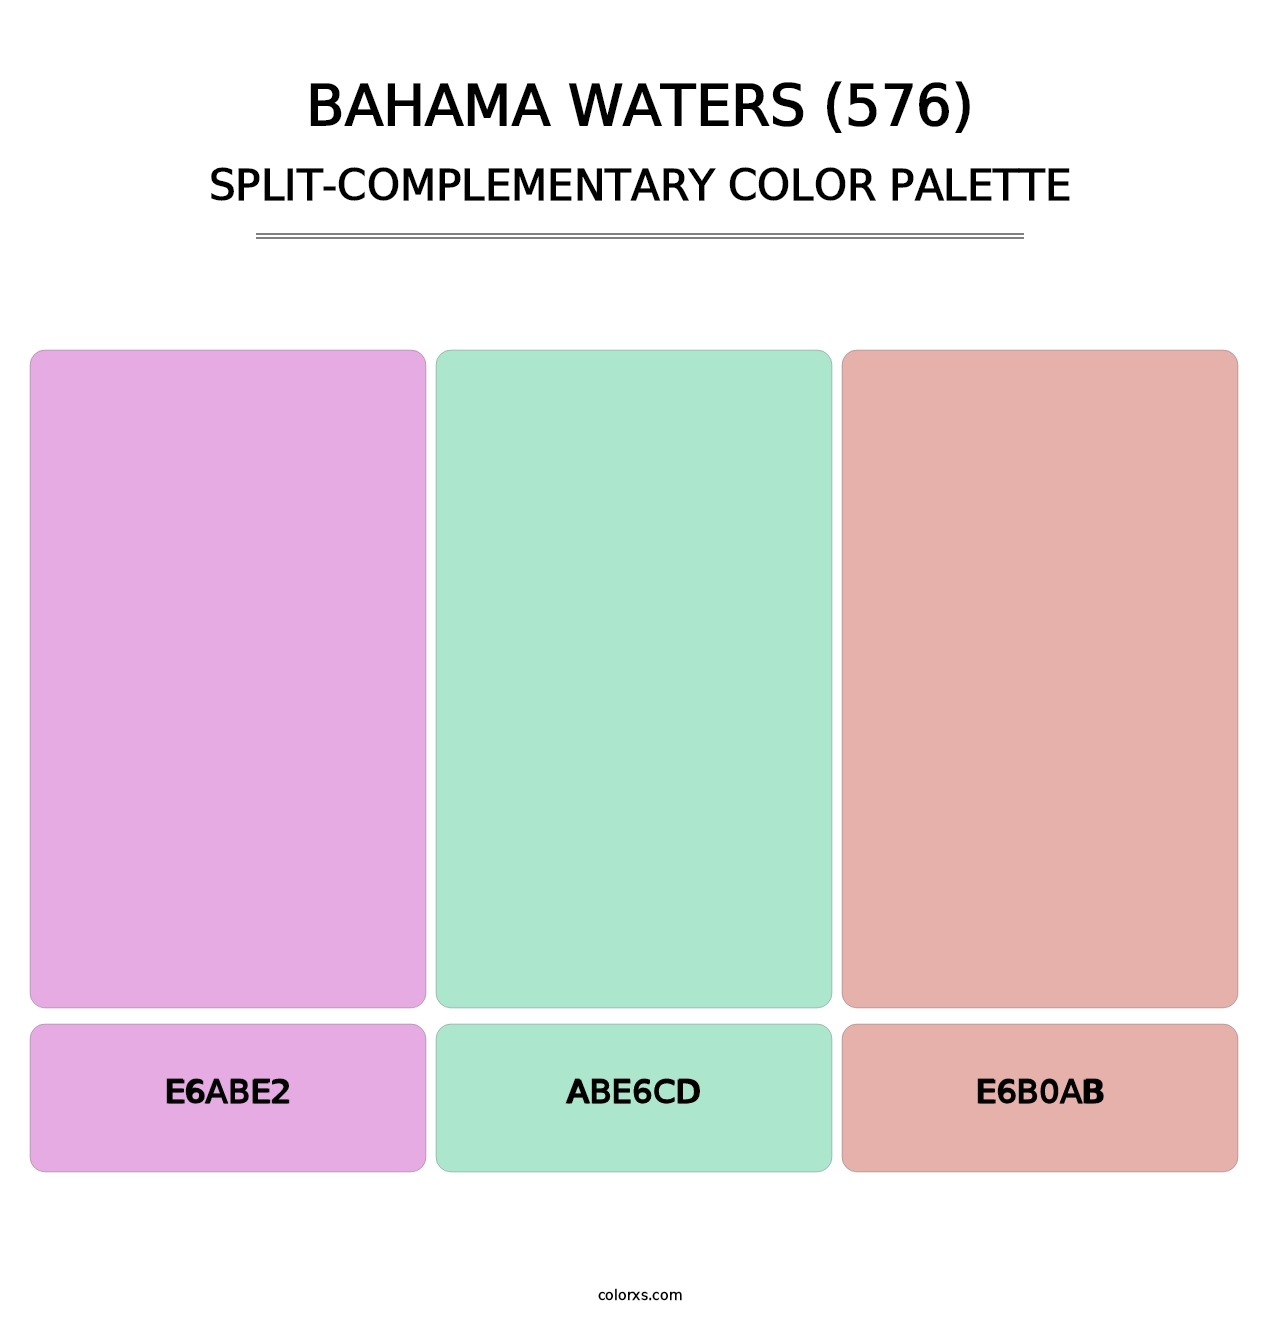 Bahama Waters (576) - Split-Complementary Color Palette